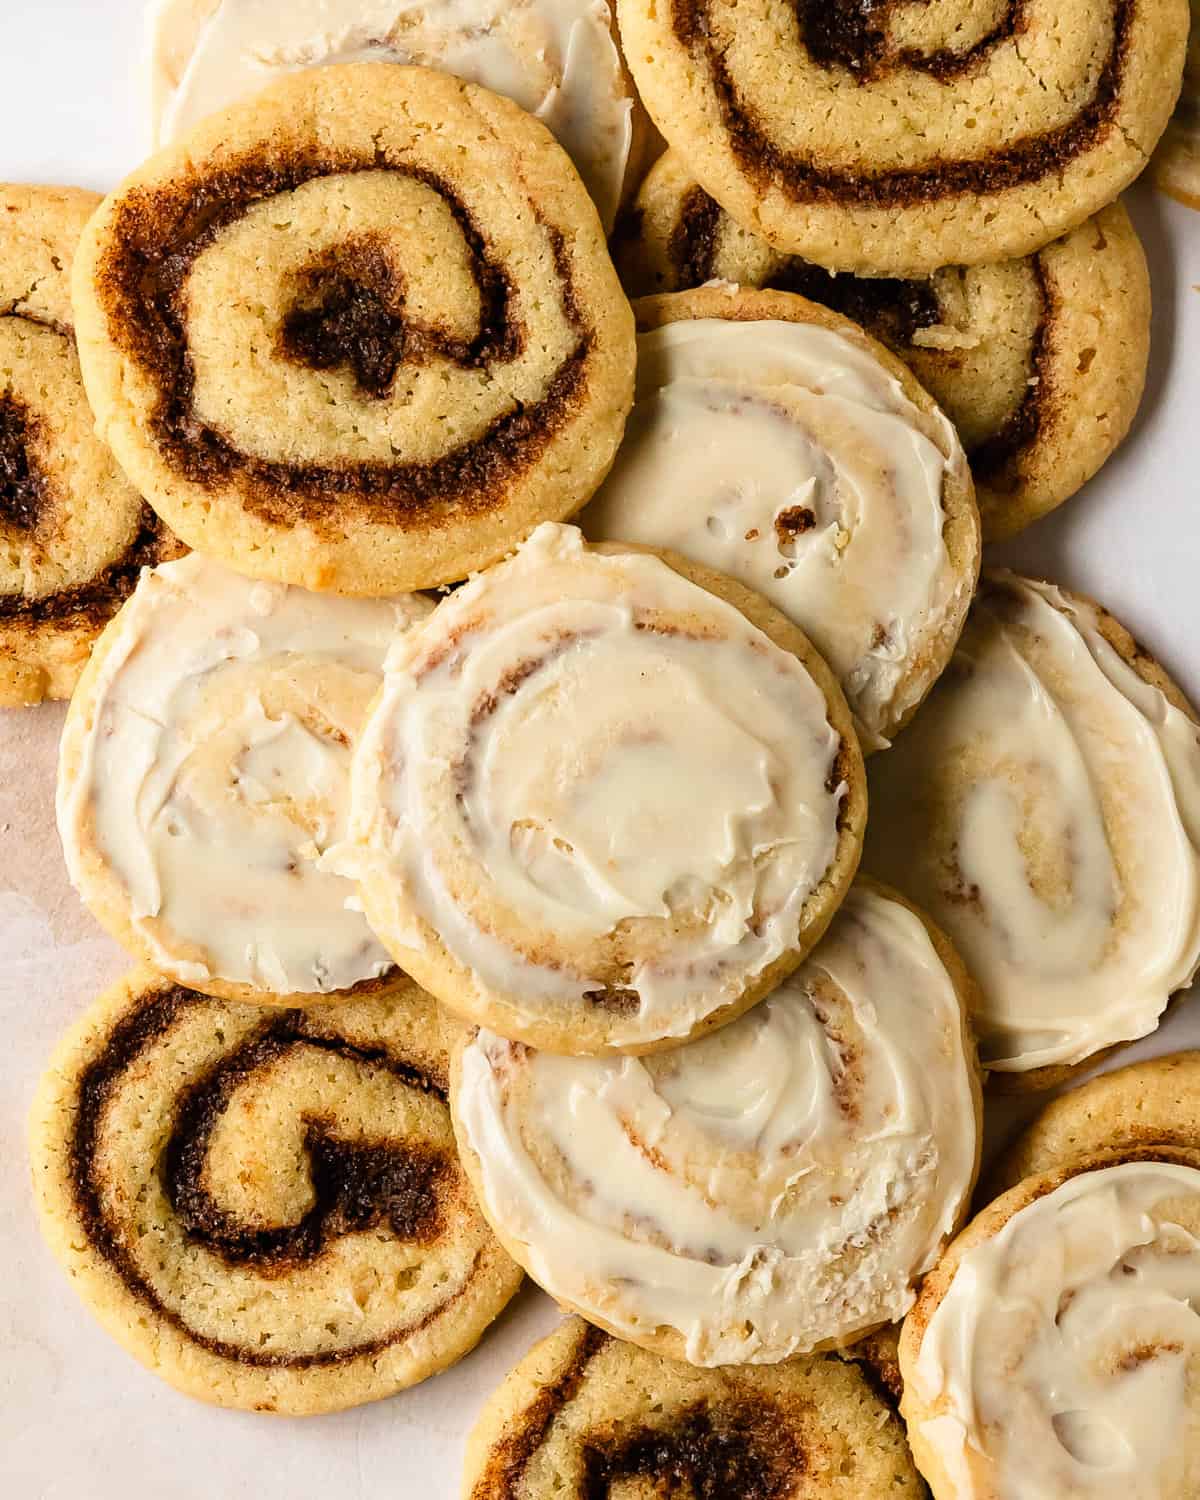 Cinnamon roll cookies are are a fun slice and bake cookie inspired by decadent cinnamon rolls. They’re soft and buttery sugar cookies swirled with a classic cinnamon roll filling. Top these soft cinnamon cookies with an easy and irresistible cream cheese icing to make these the best frosted cinnamon roll cookies everyone will love.